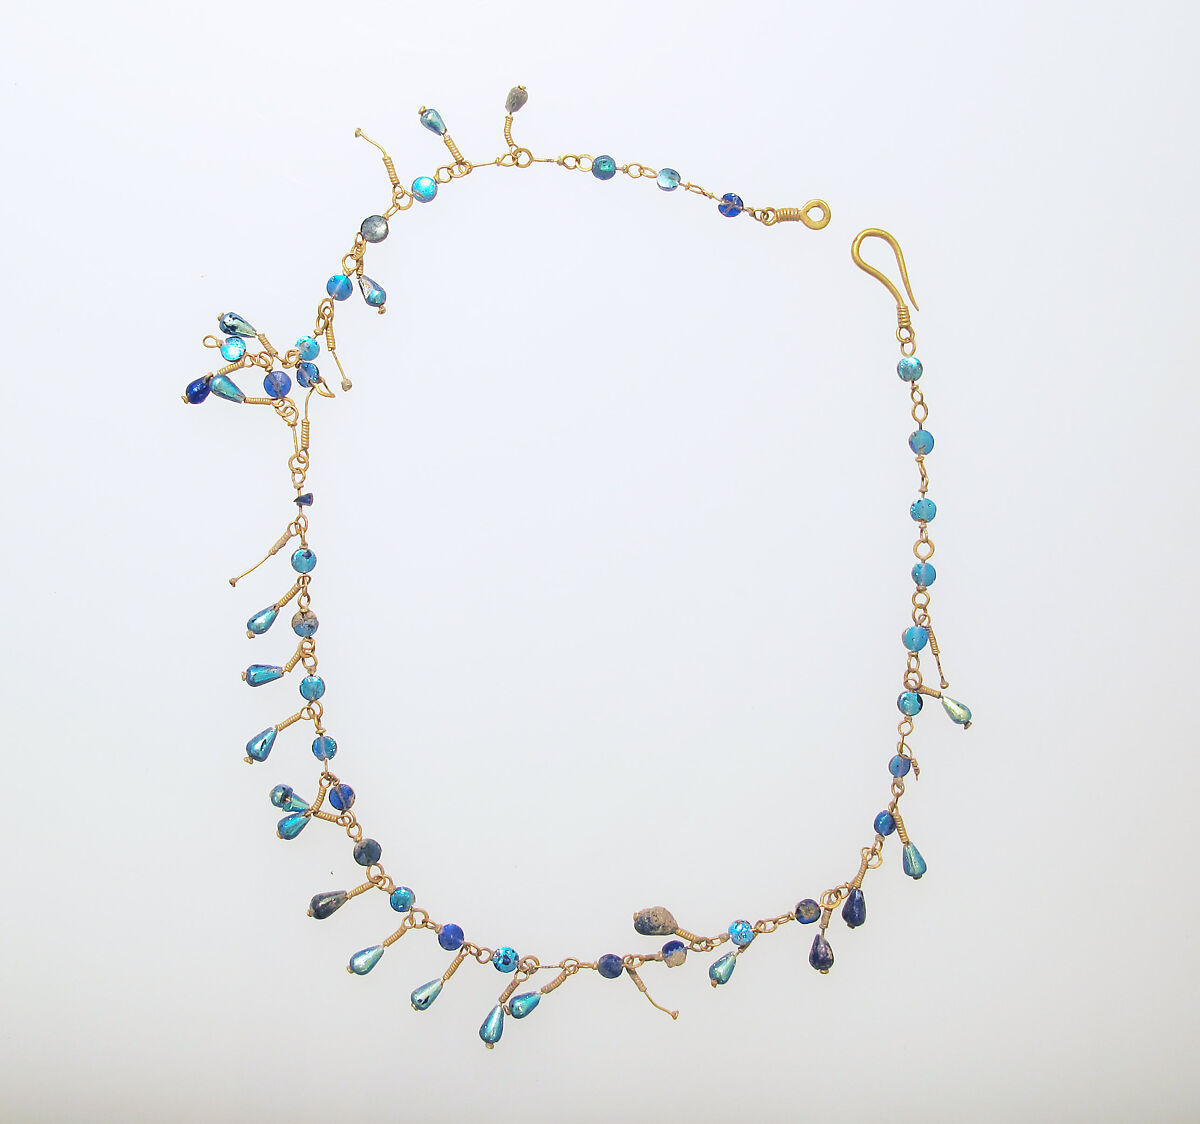 Necklace with blue beads | The Metropolitan Museum of Art